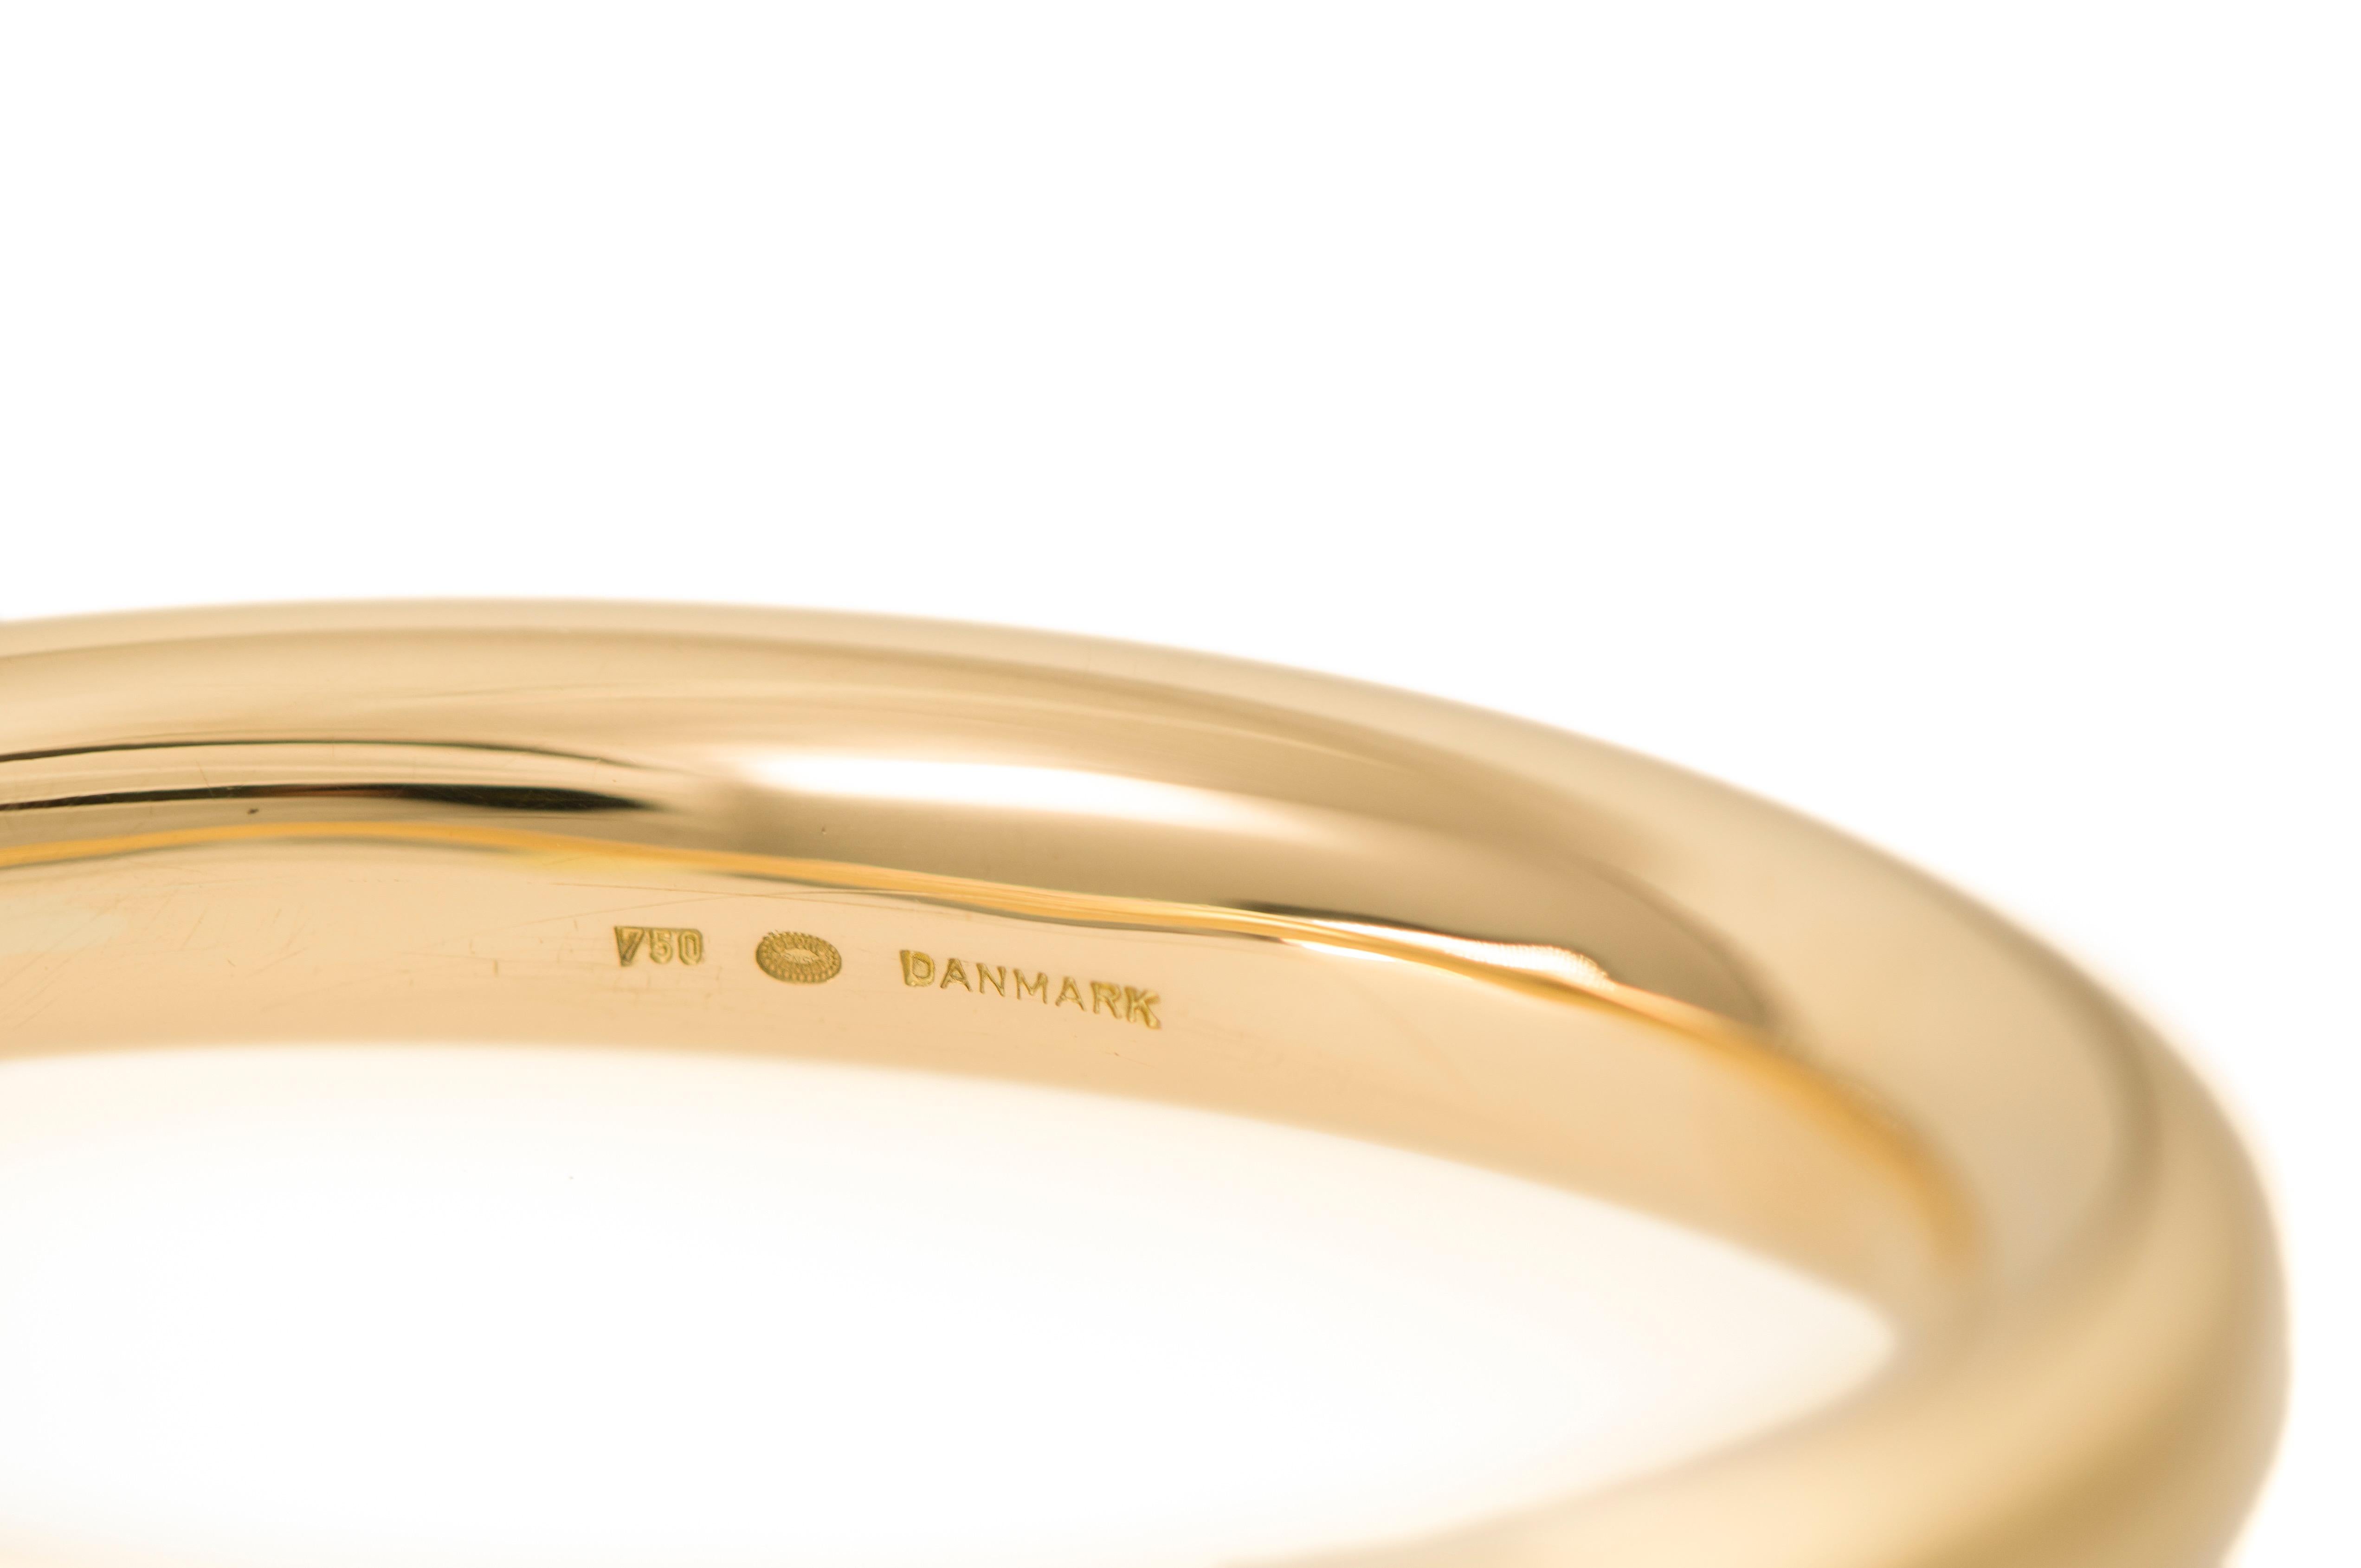 An 18 karat gold bangle bracelet, by Anne Ammitzbøll for Georg Jensen, c. 1975

The bracelet is stamped 750 and Denmark, with makers mark for Jensen and Ammitzboll. It has an interior circumference of 8